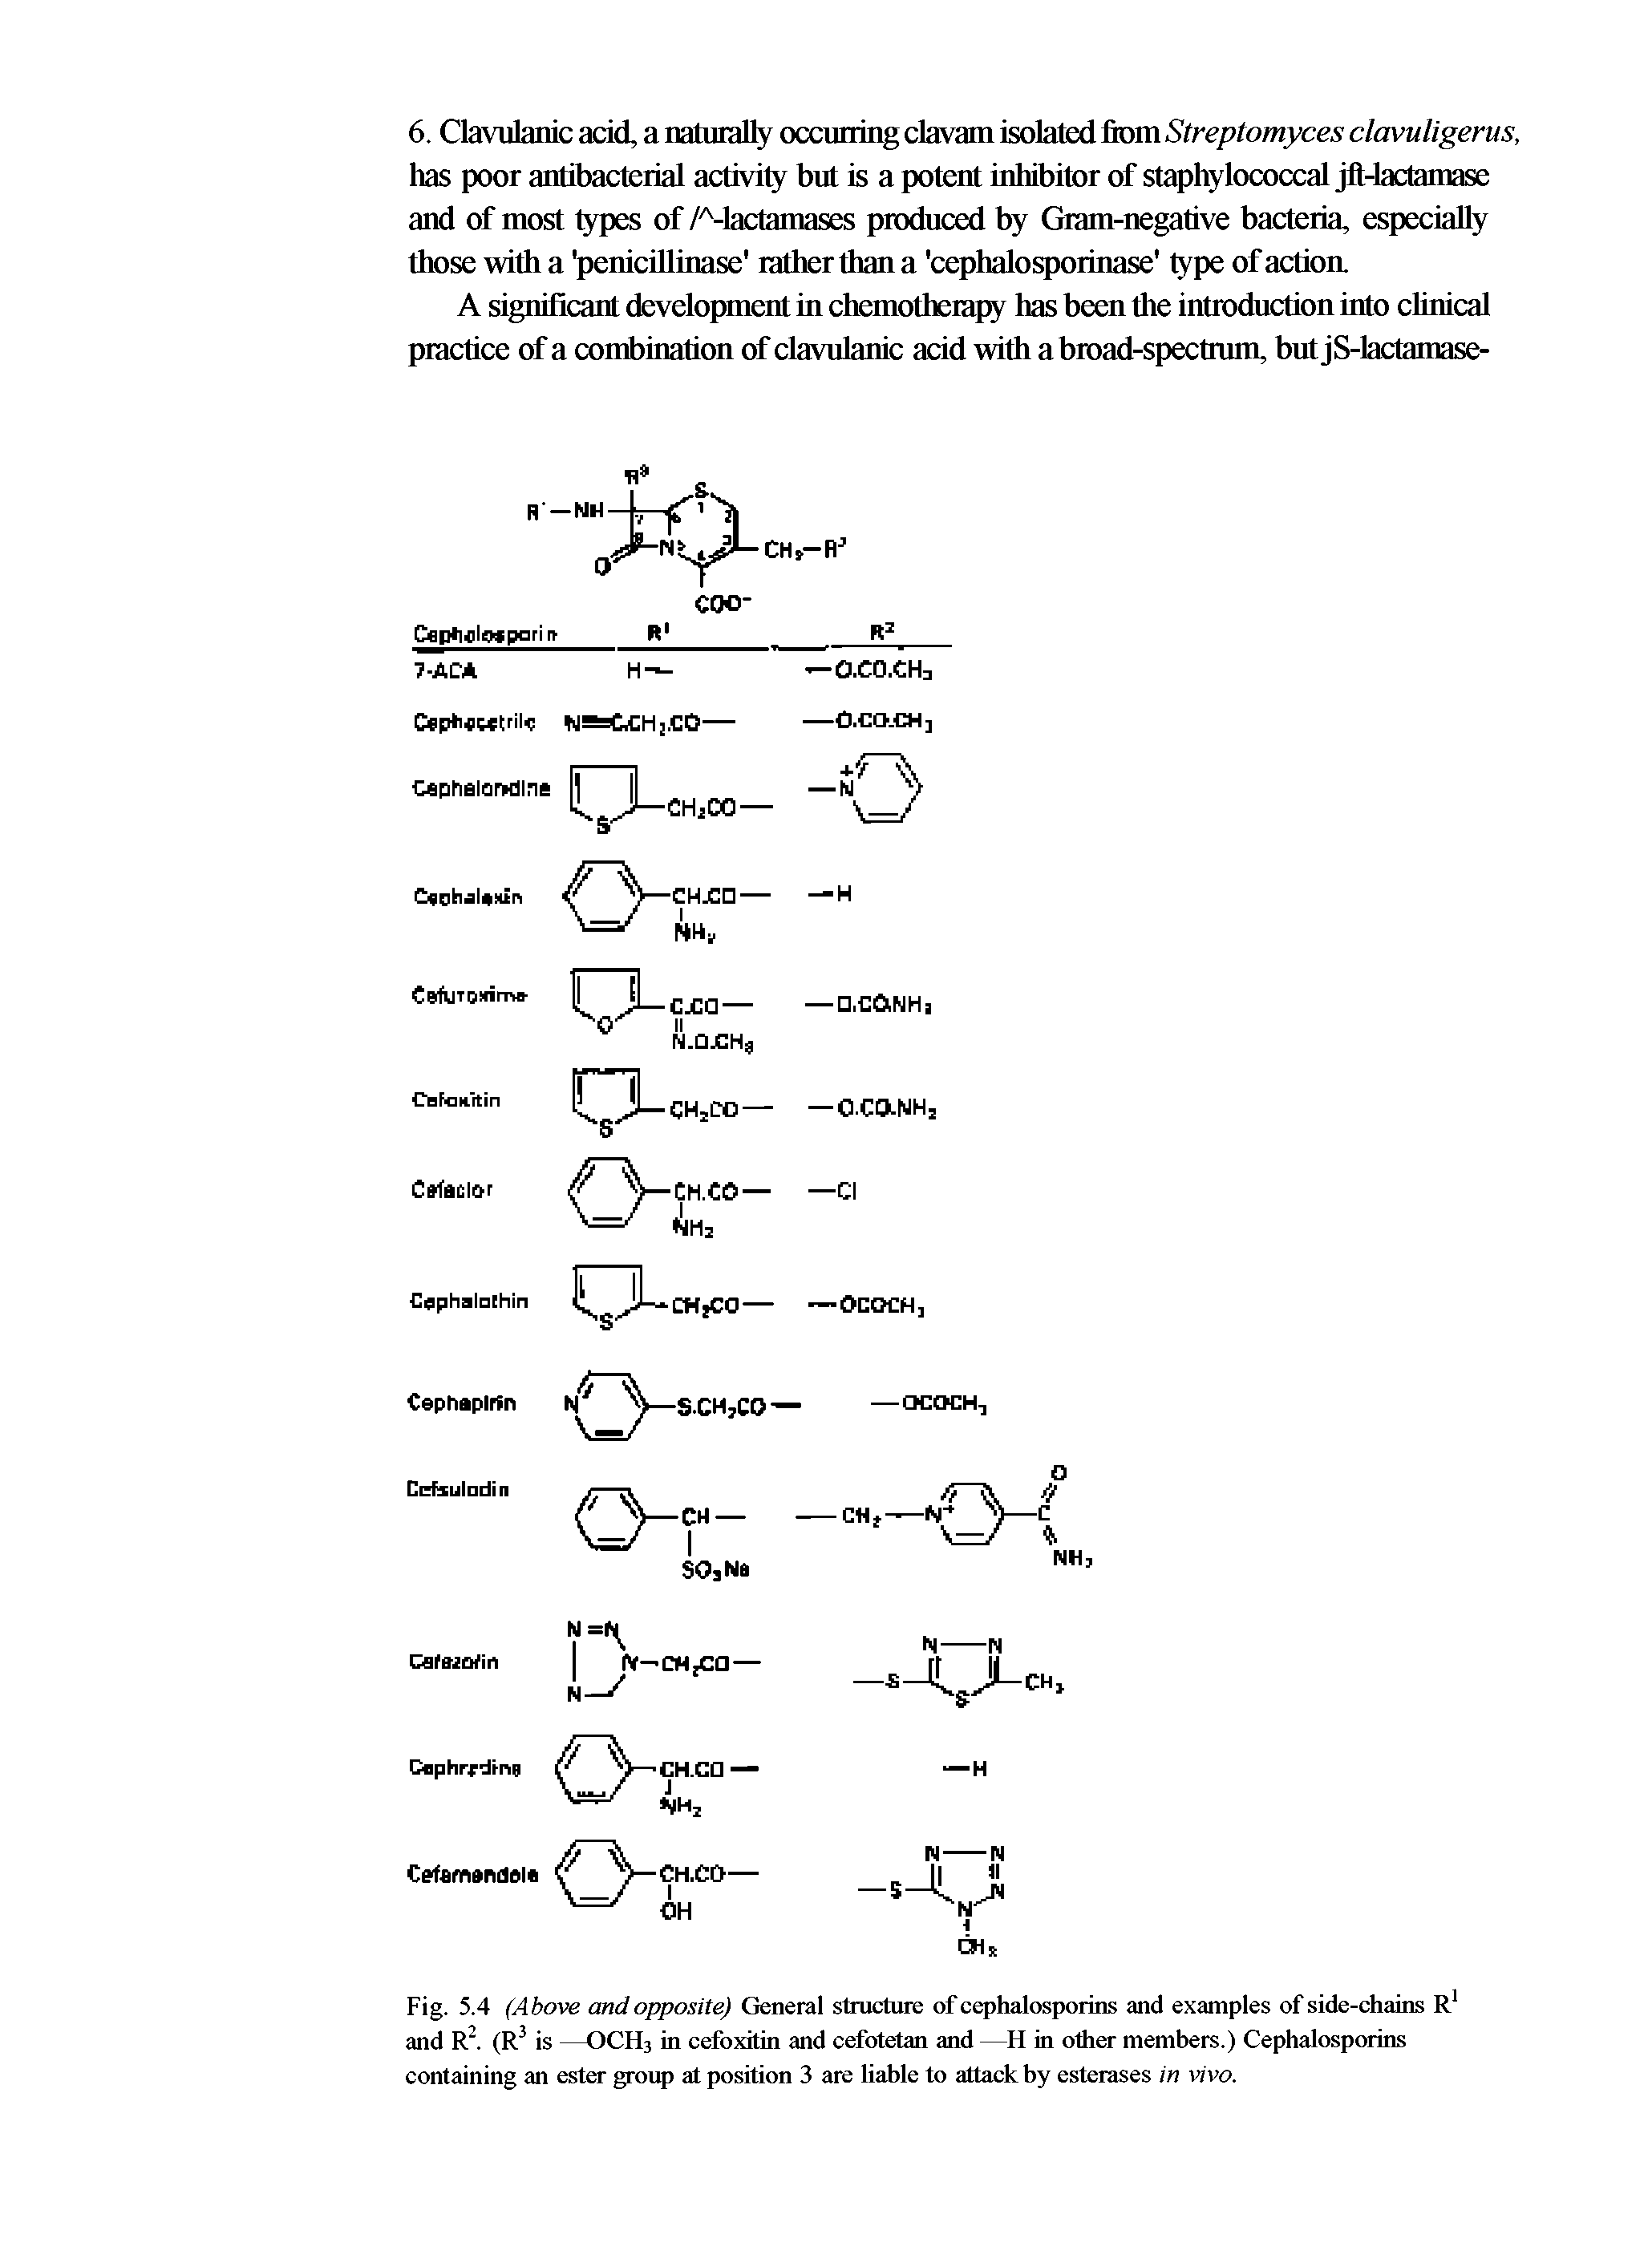 Fig. 5.4 (Above and opposite) General structure of cephalosporins and examples of side-chains R and R. (R is —OCH3 in cefoxitin and cefotetan and —H in other members.) Cephalosporins containing an ester group at position 3 are liable to attack by esterases in vivo.